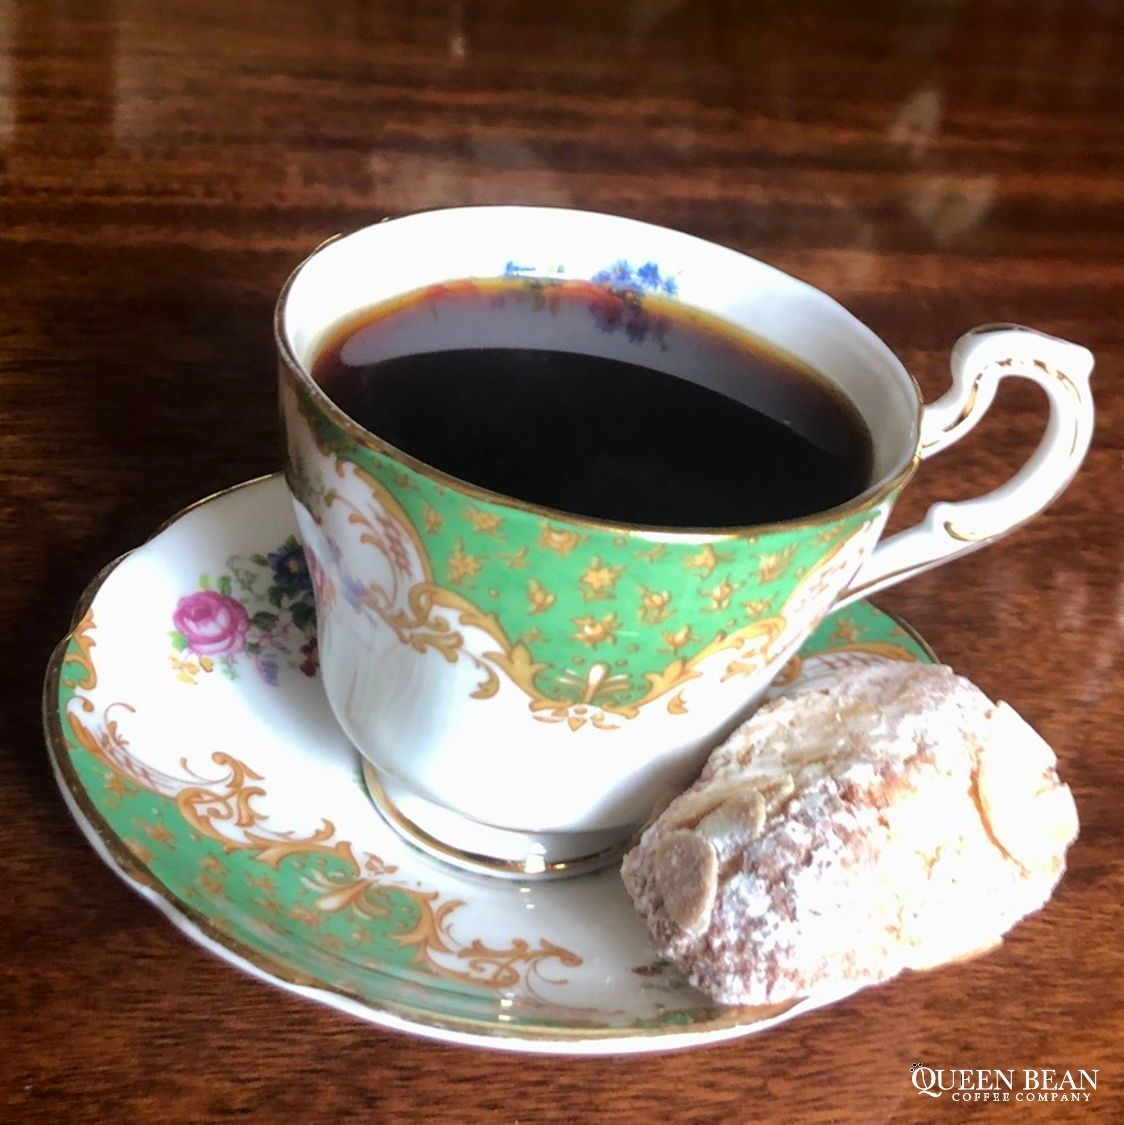 A cup of morning sunshine! Smooth, silky Biscotti #coffee. 20% off now! buff.ly/2zs3re3 #TheQueenBean #Monday #CoffeeLover